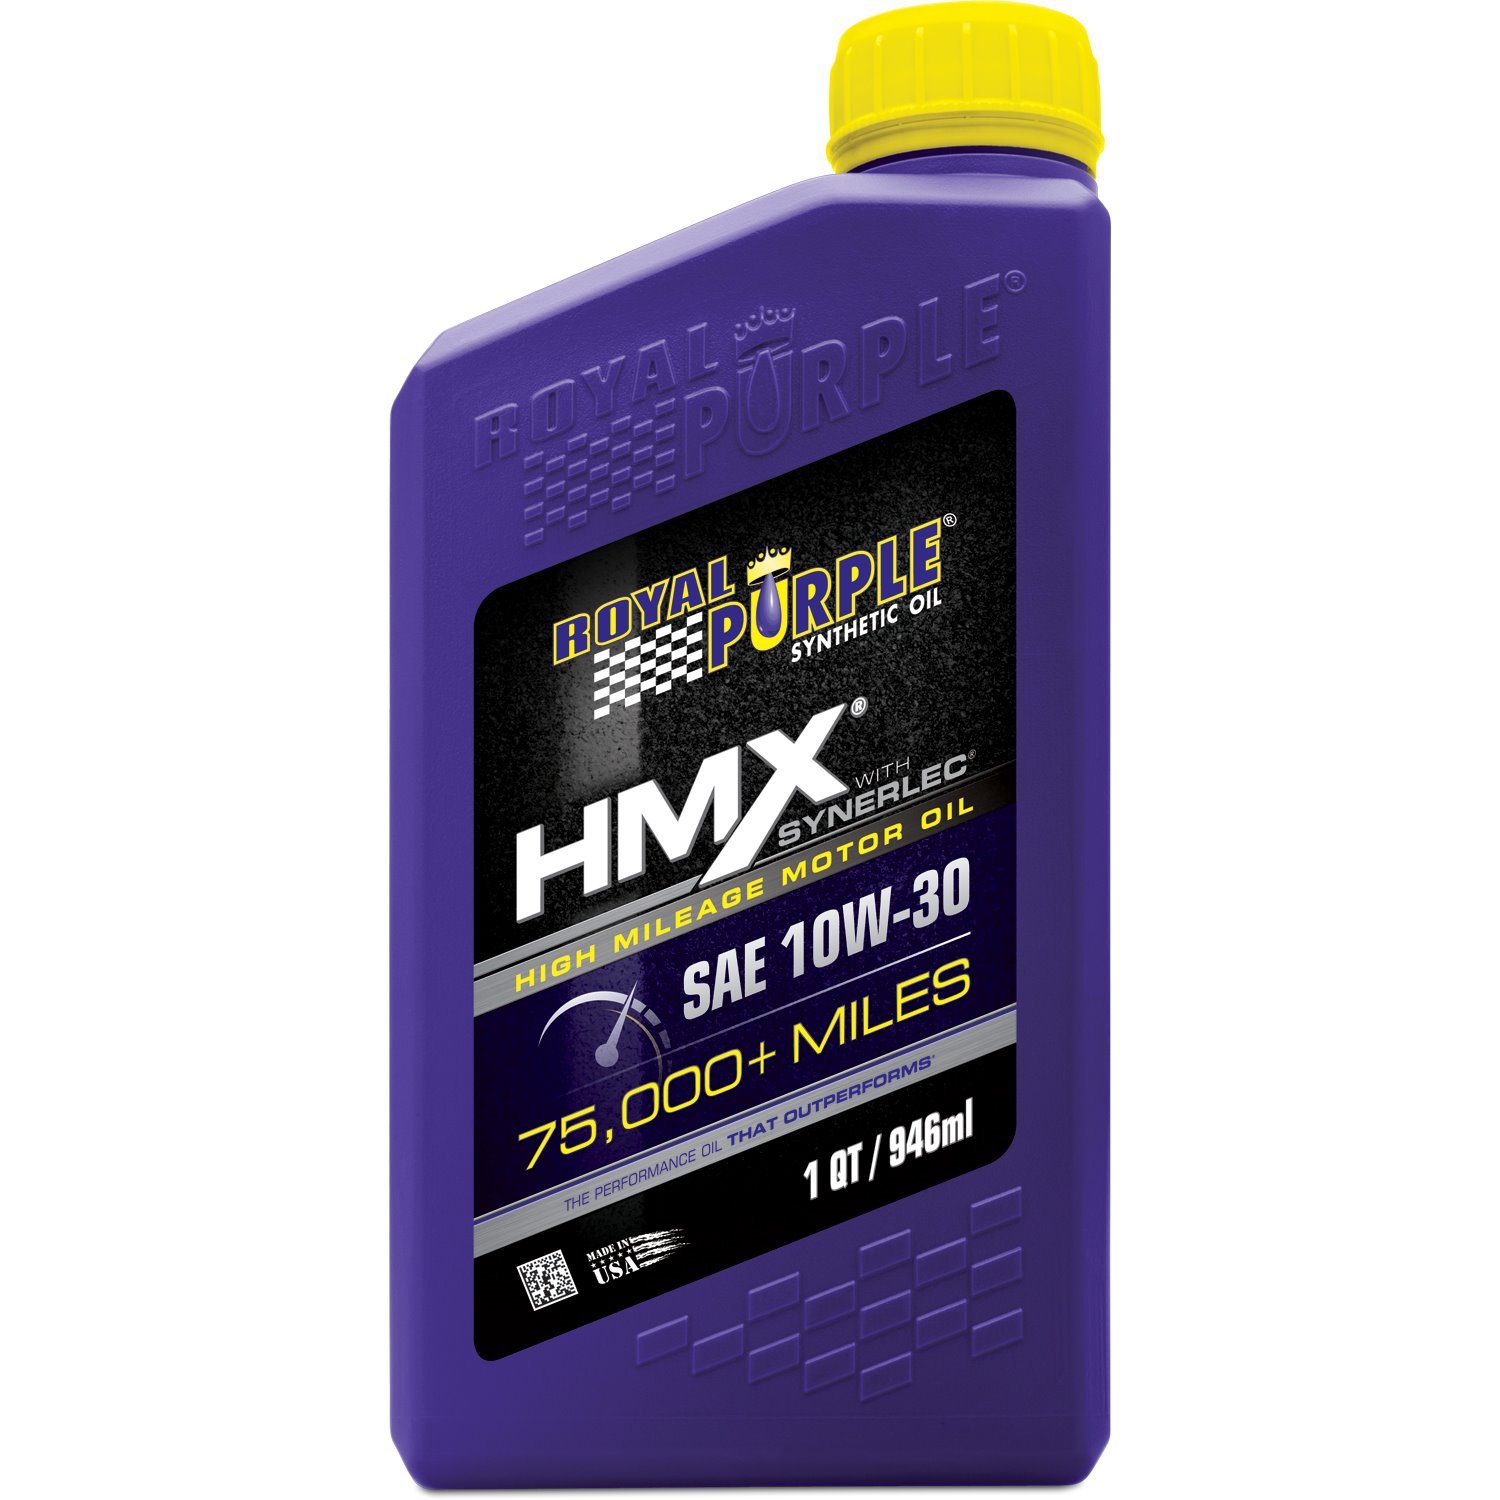 HMX High Mileage Synthetic Motor Oil 10W30